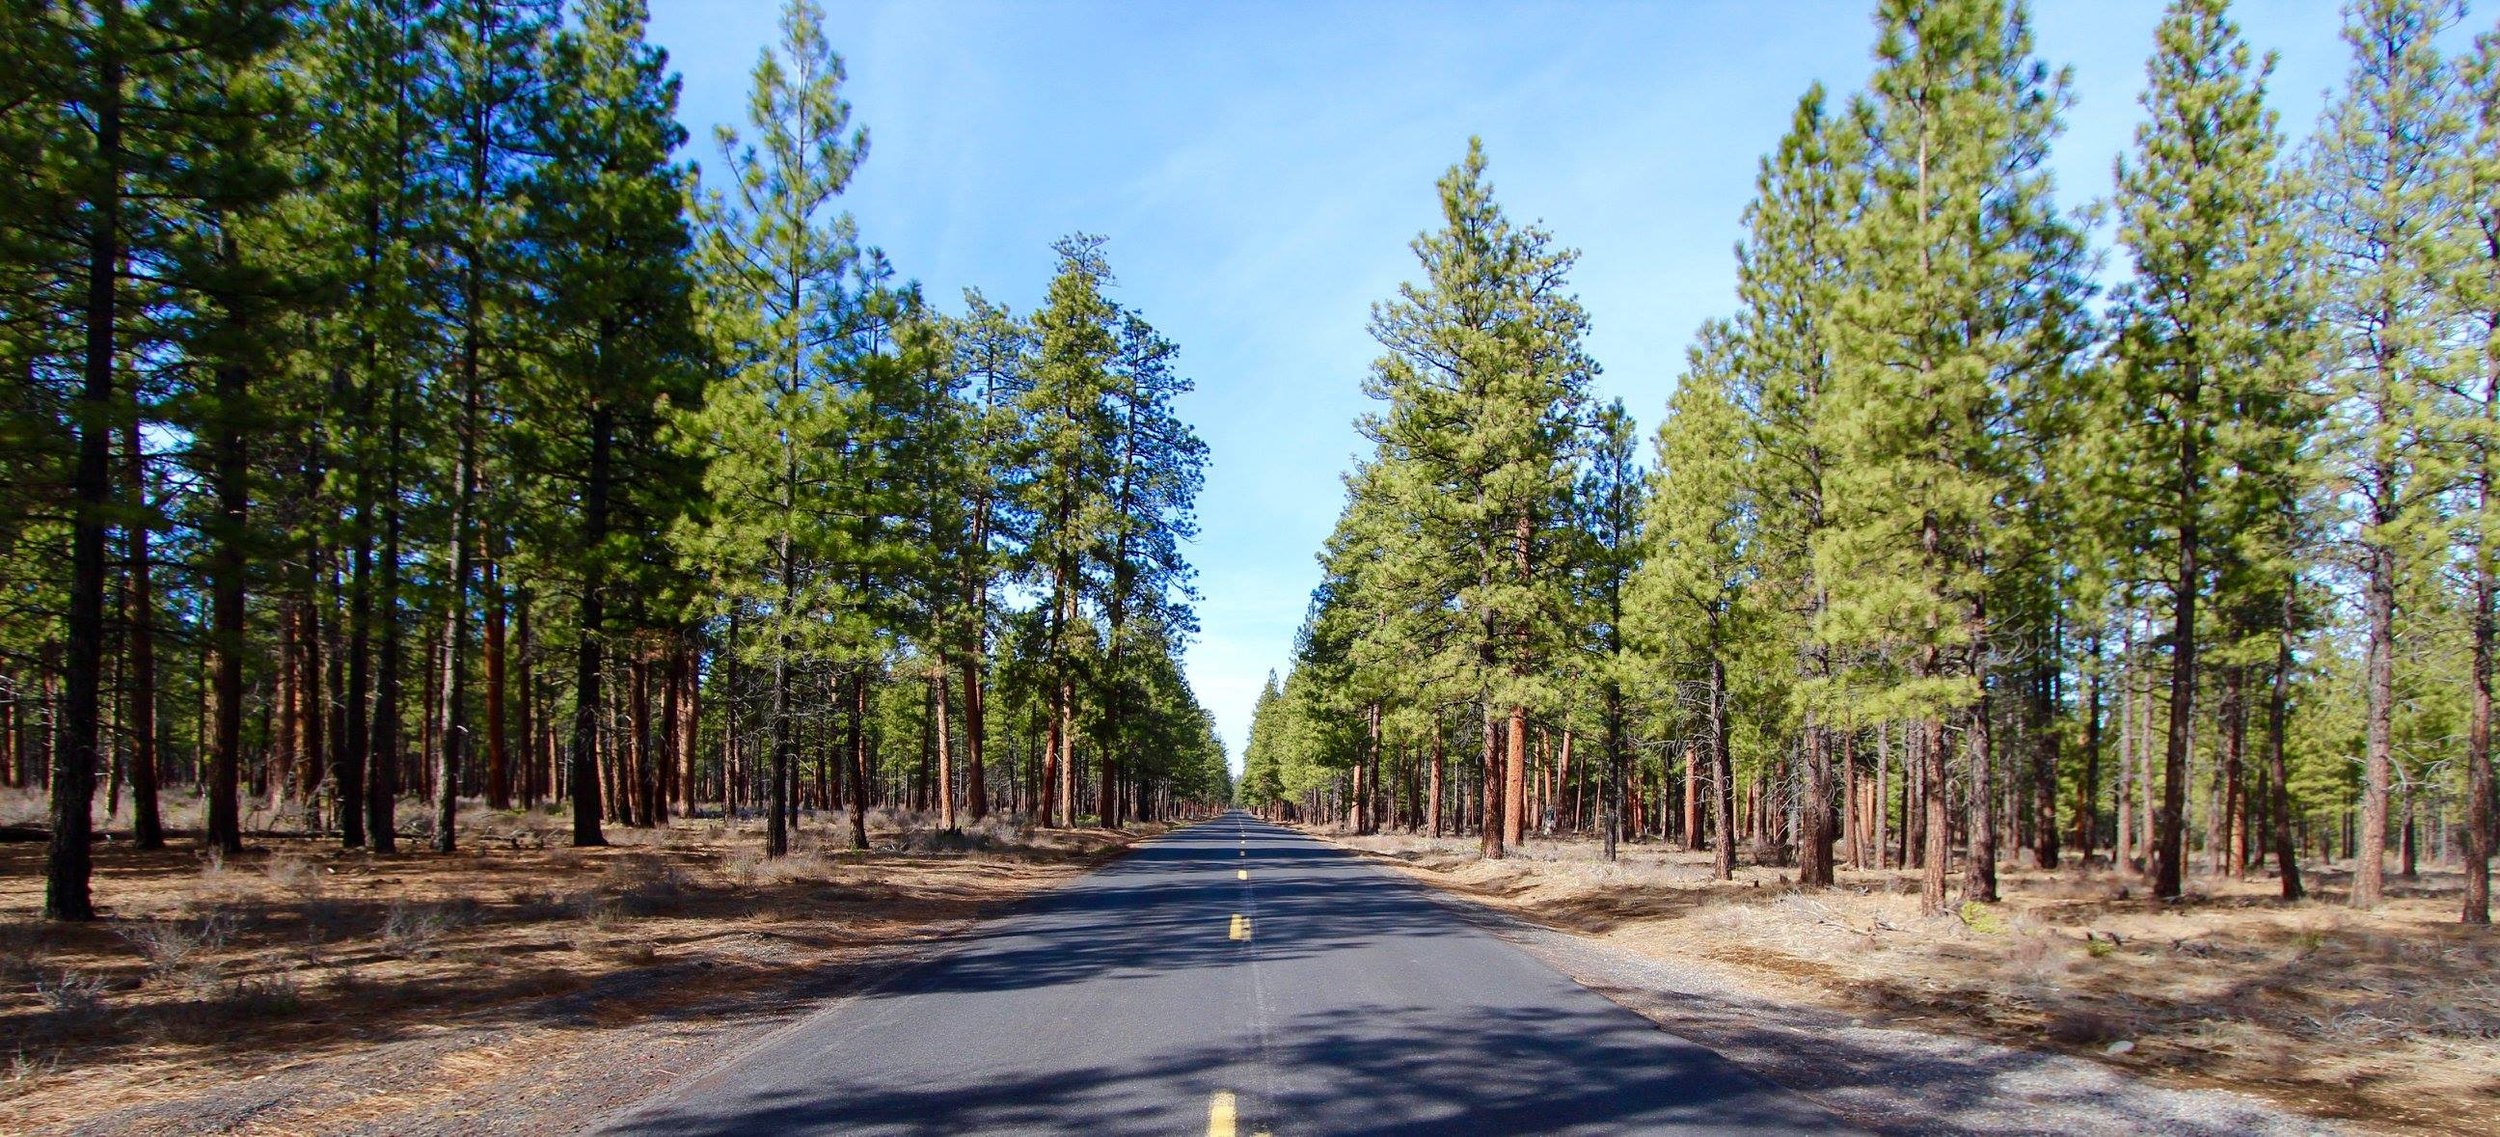 State Highway 226 and Ponderosa Pines, Sisters, Ore.